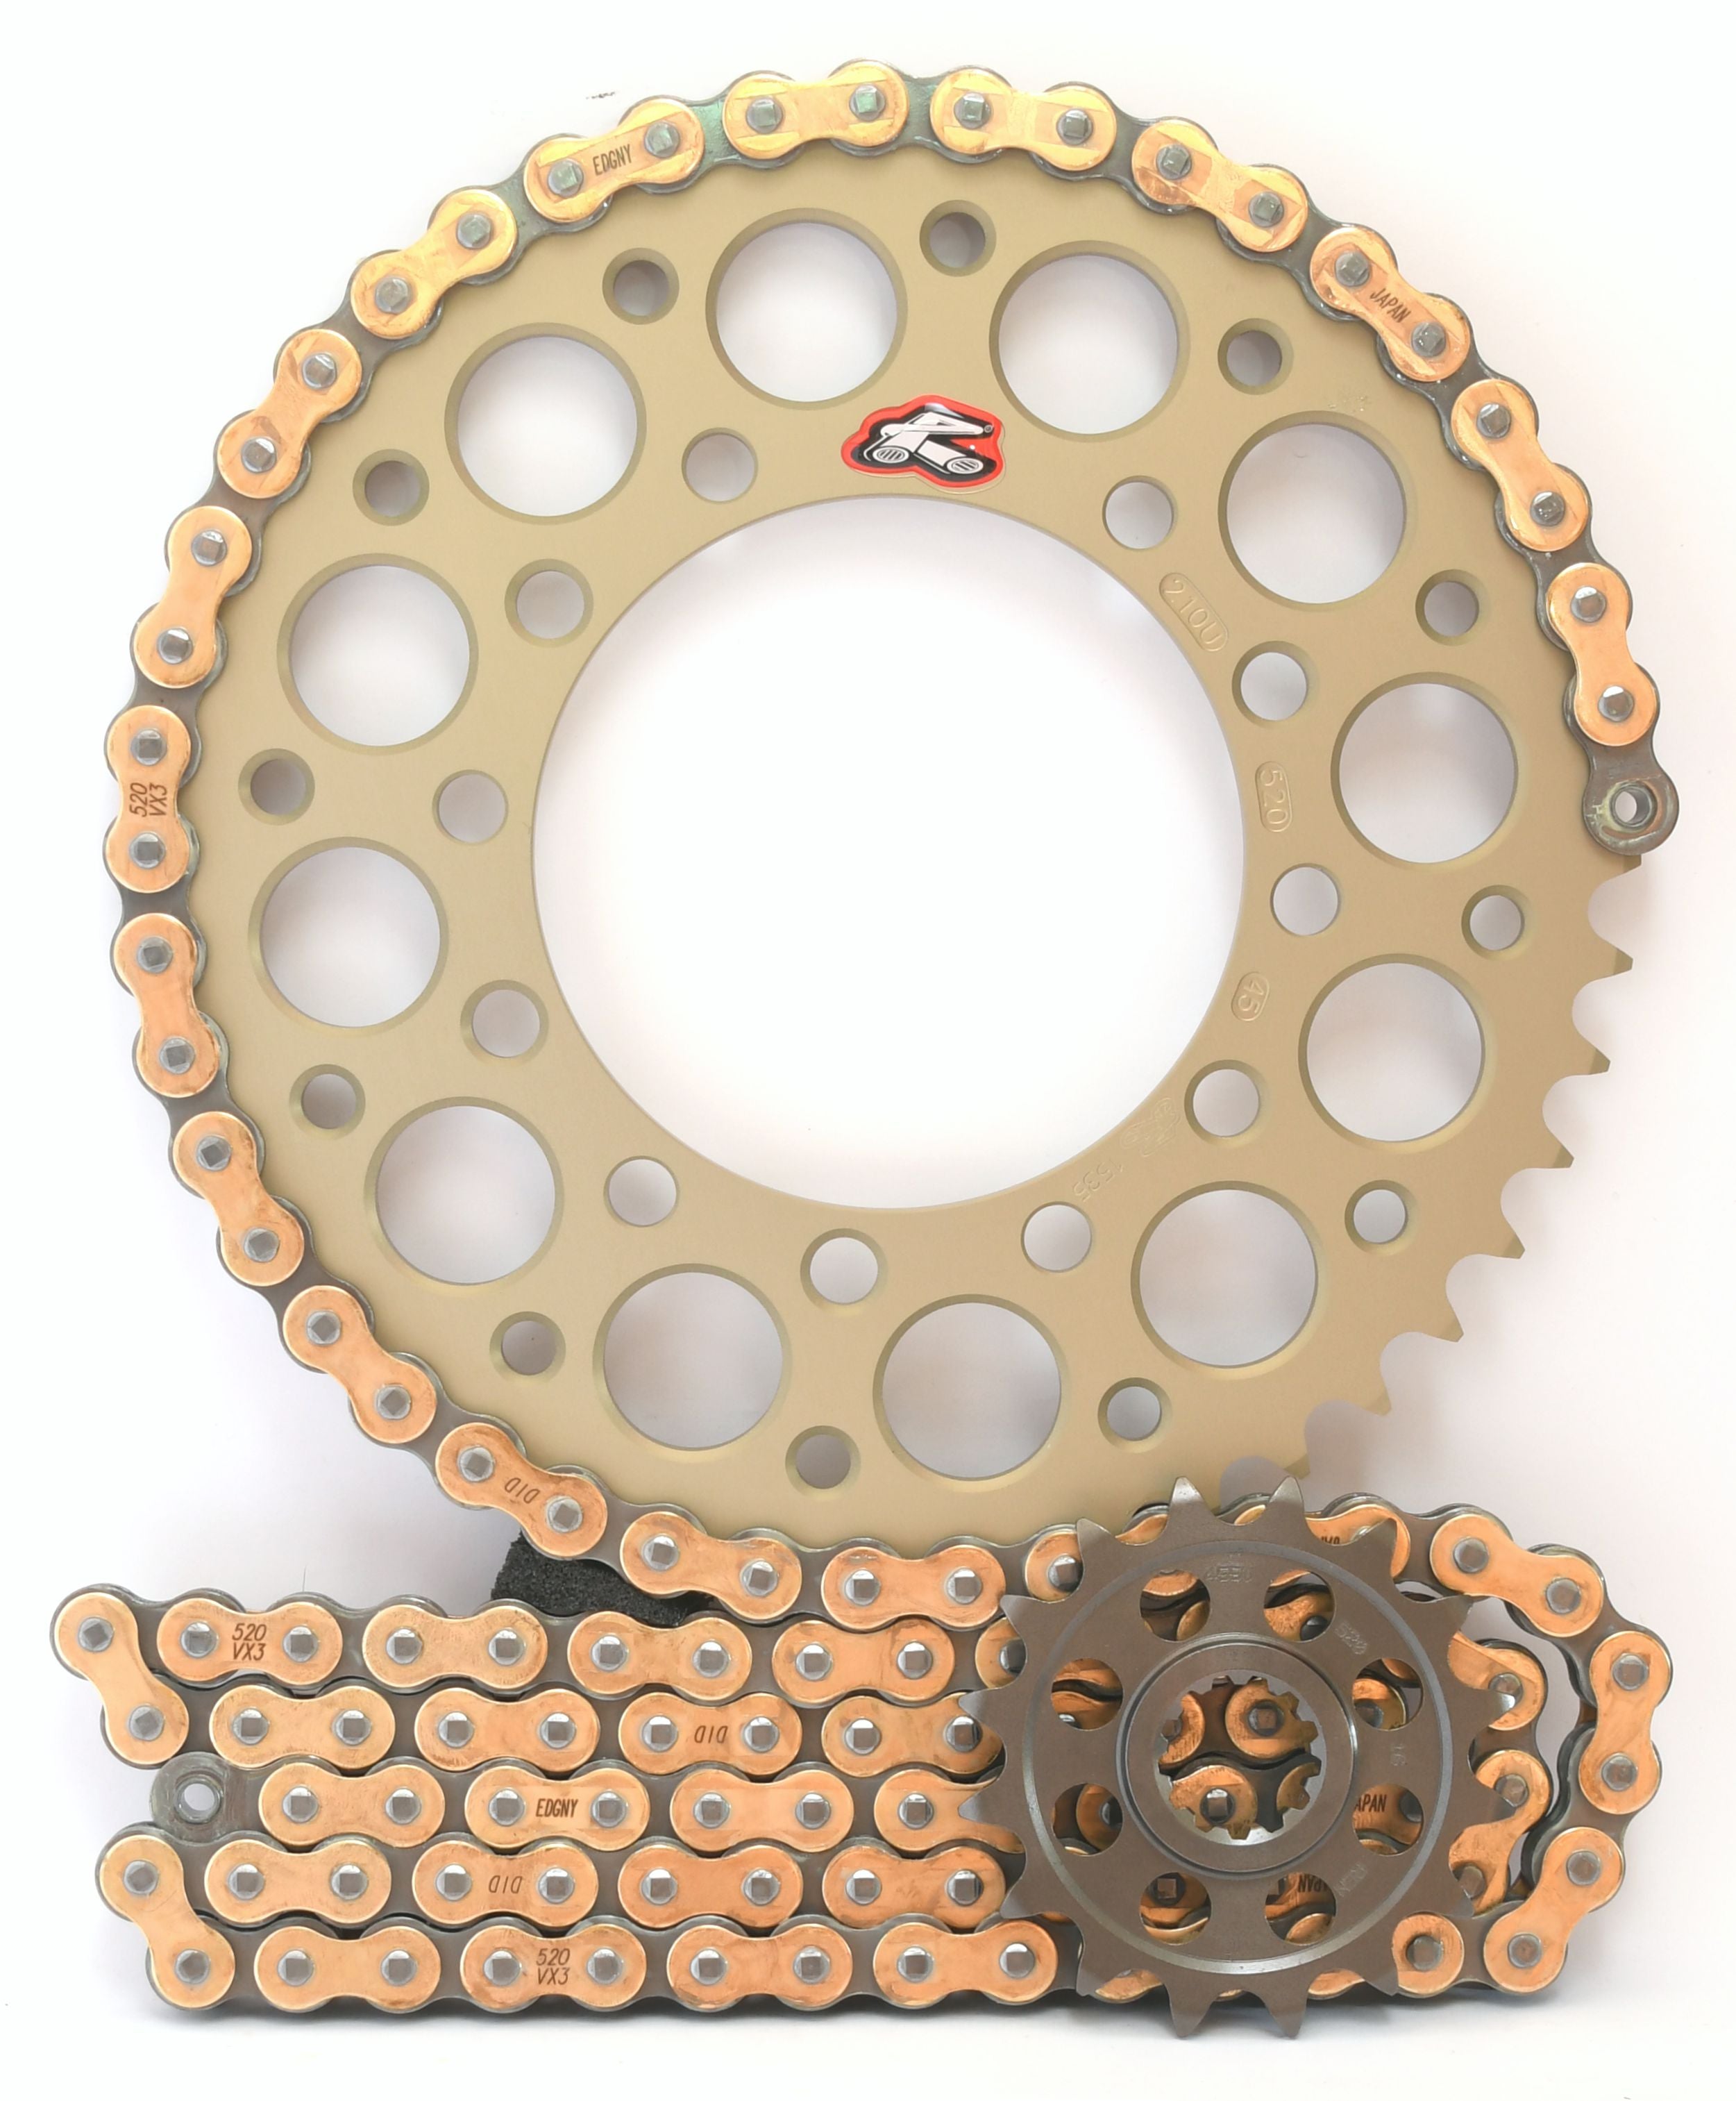 Renthal and DID Chain & Sprocket Kit for Kawasaki Z800 2013-2016 - Standard Gearing